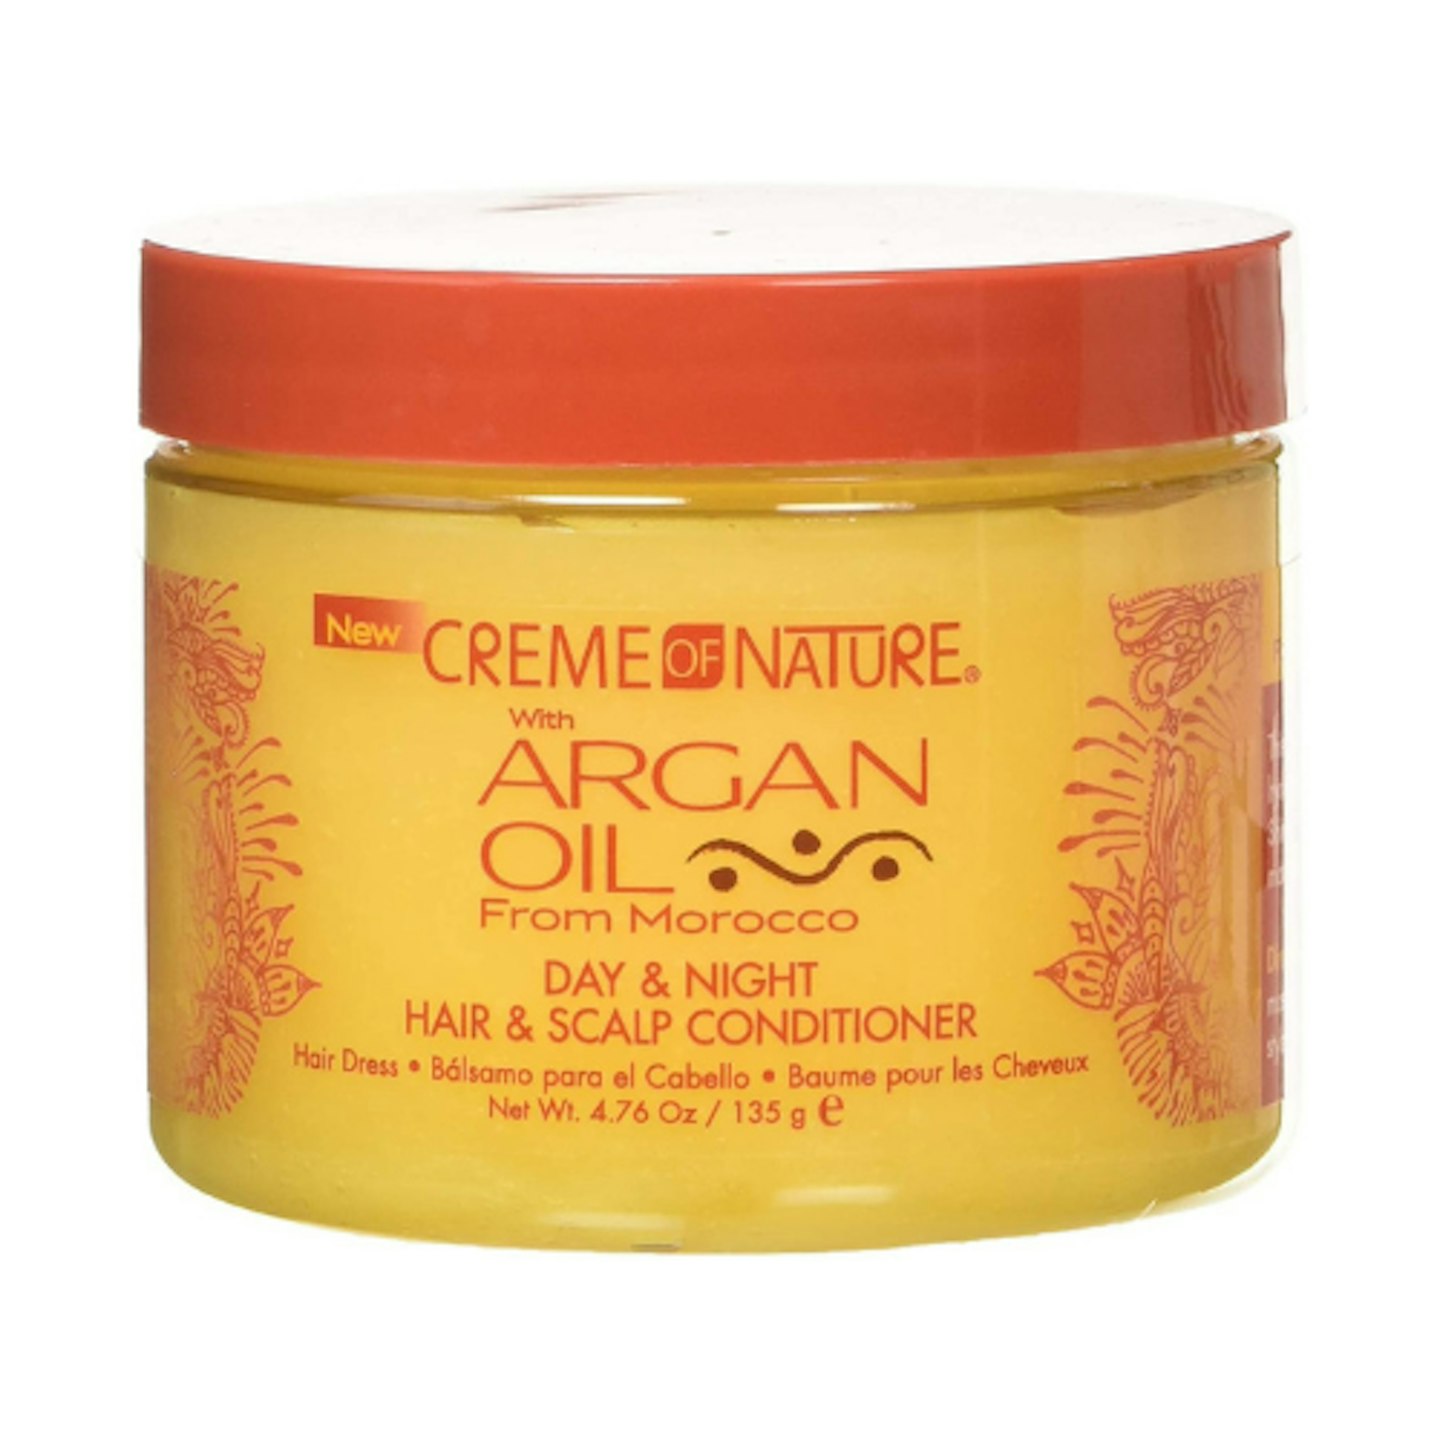 Creme Of Nature Argan Oil Day Night Hair and Scalp Conditioner on white background